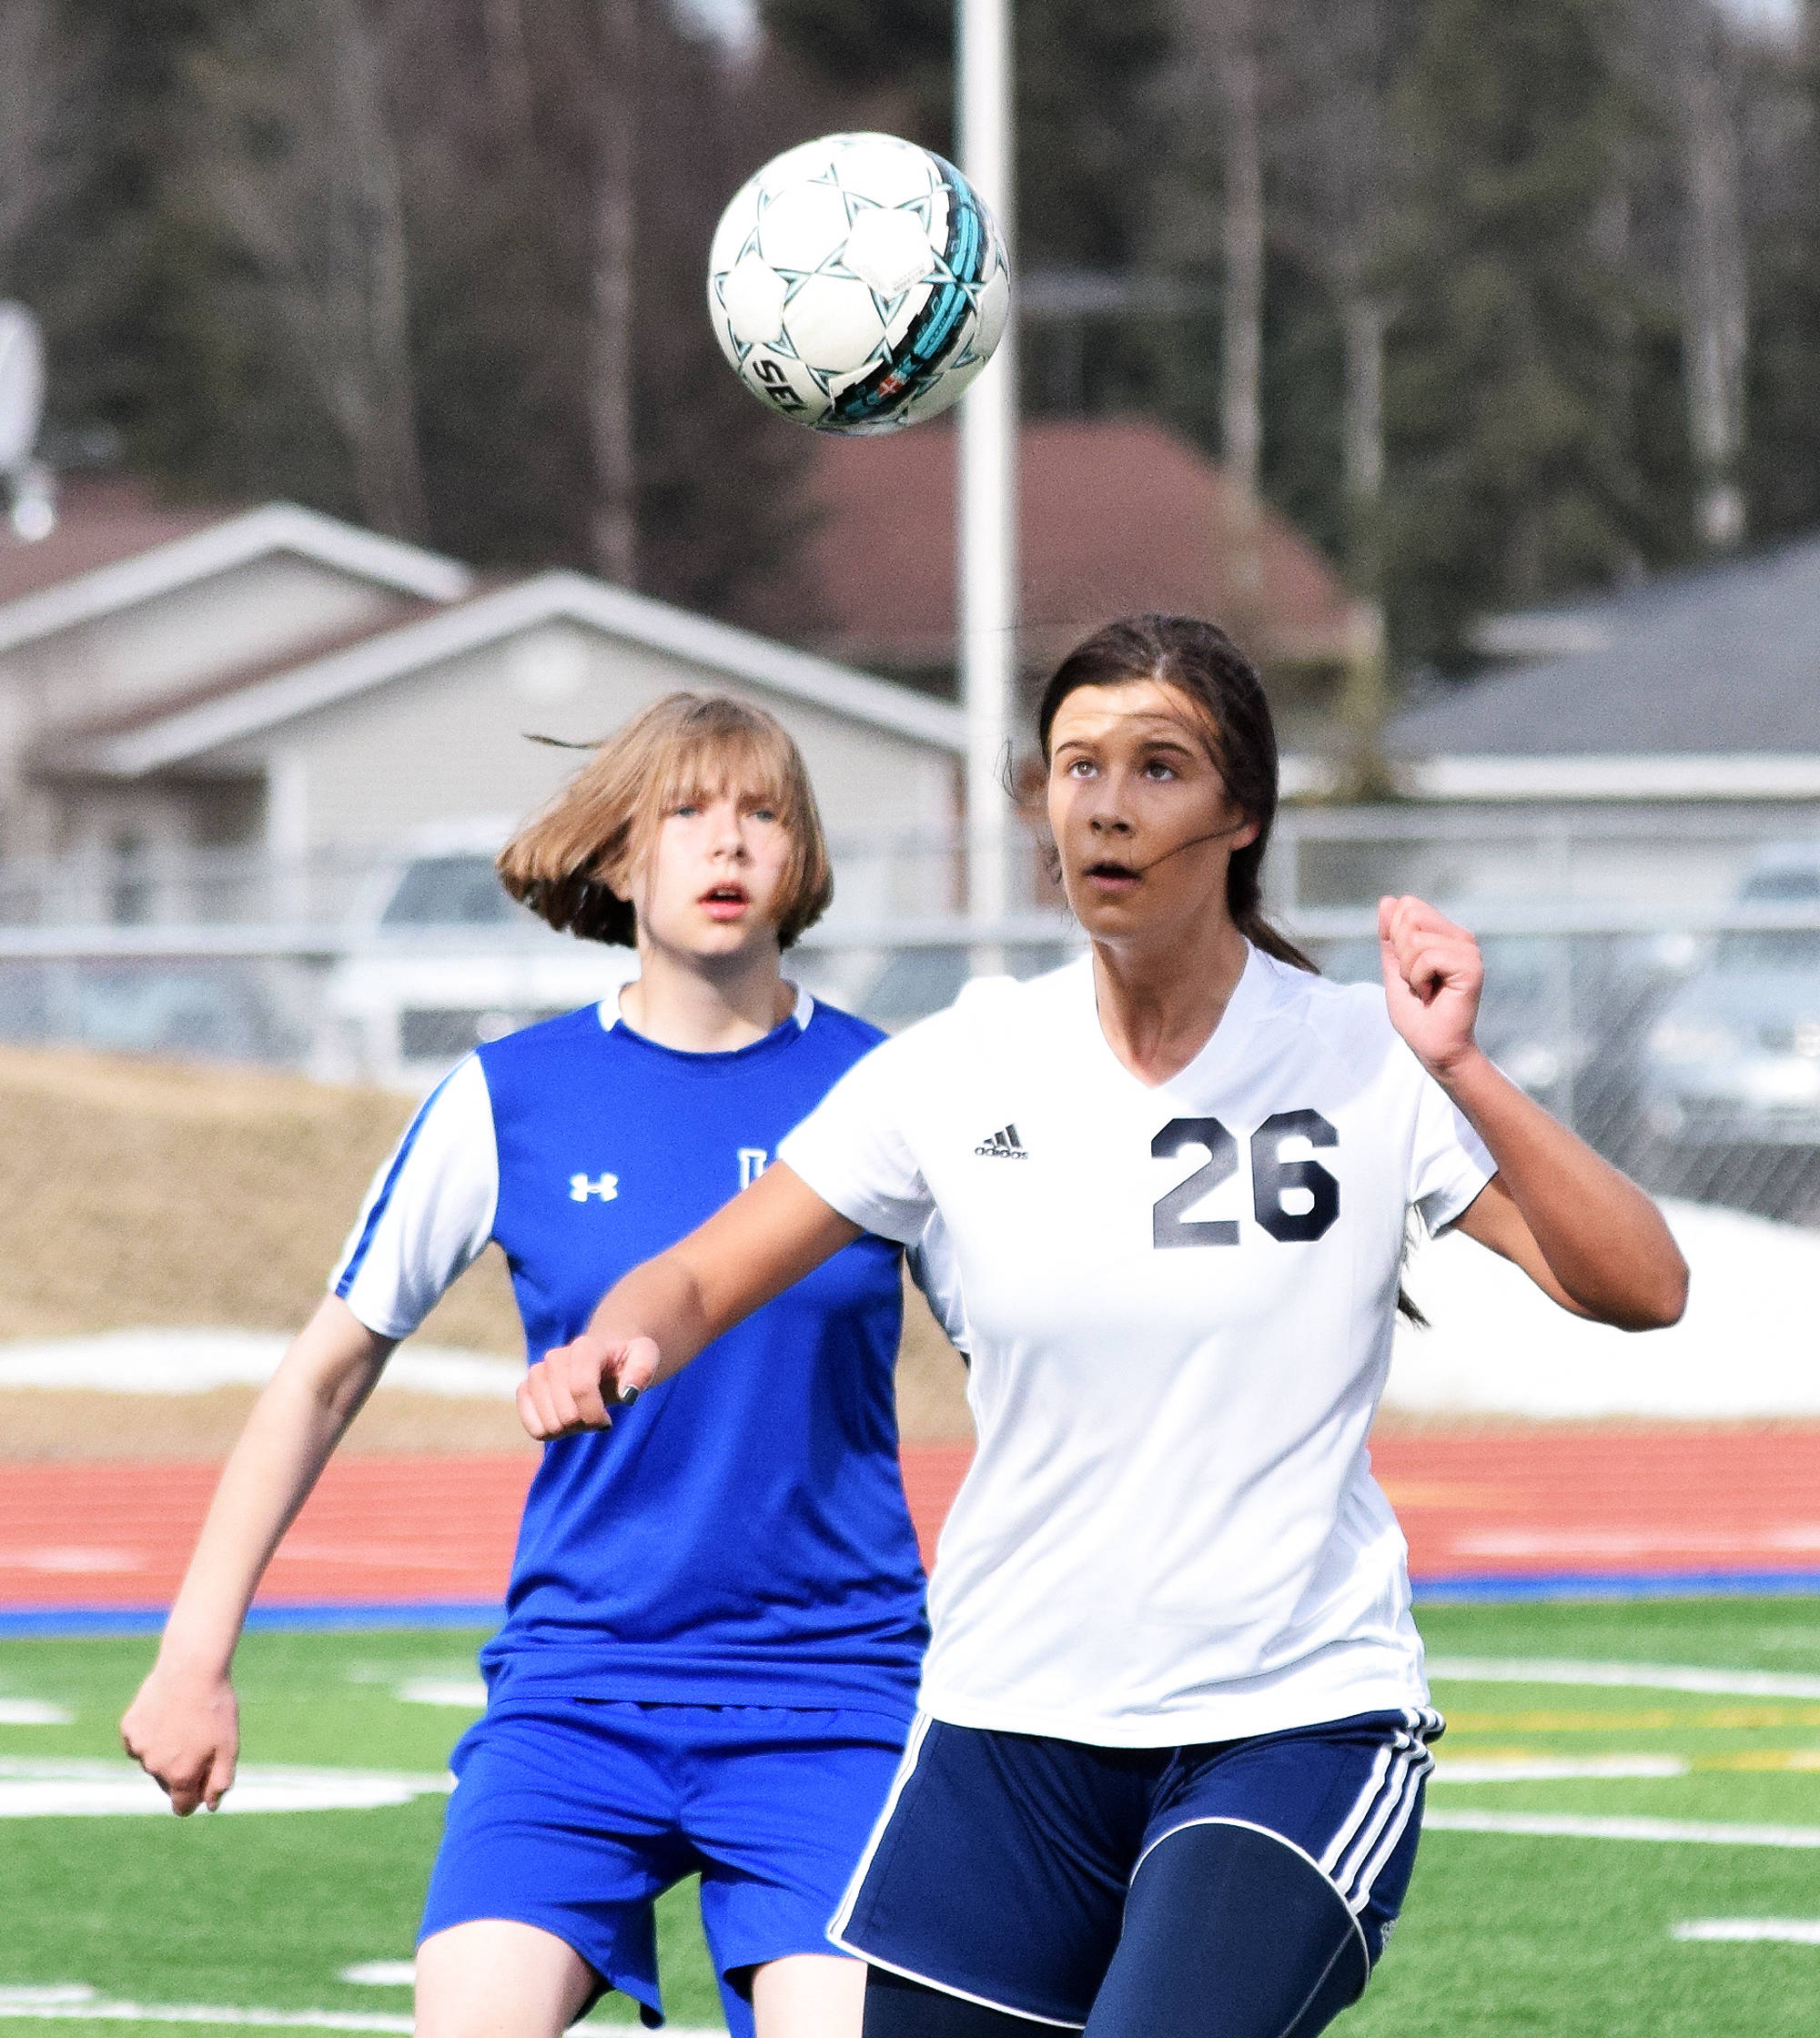 Soldotna’s Whitney Wortham heads the ball in front of Kodiak’s Cassie Scherler Friday at Justin Maile Field in Soldotna (Photo by Joey Klecka/Peninsula Clarion)